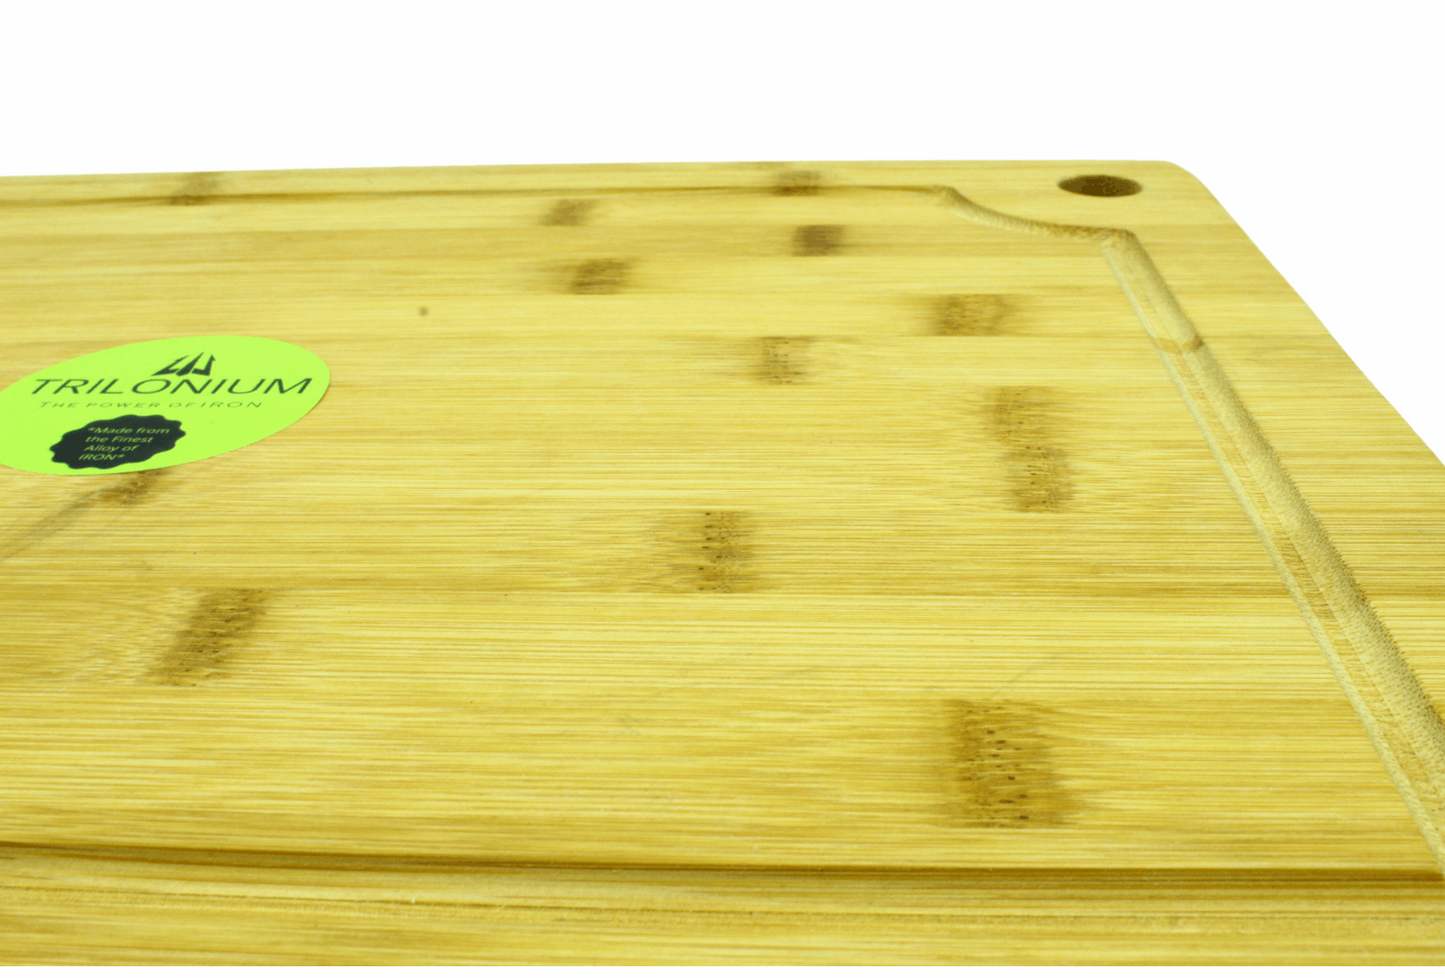 Bamboo Chopping Board | Cutting Board 16 x 12 inches + Set Of 3 Pcs Stainless Steel Knives | Combo TRILONIUM | Cast Iron Cookware